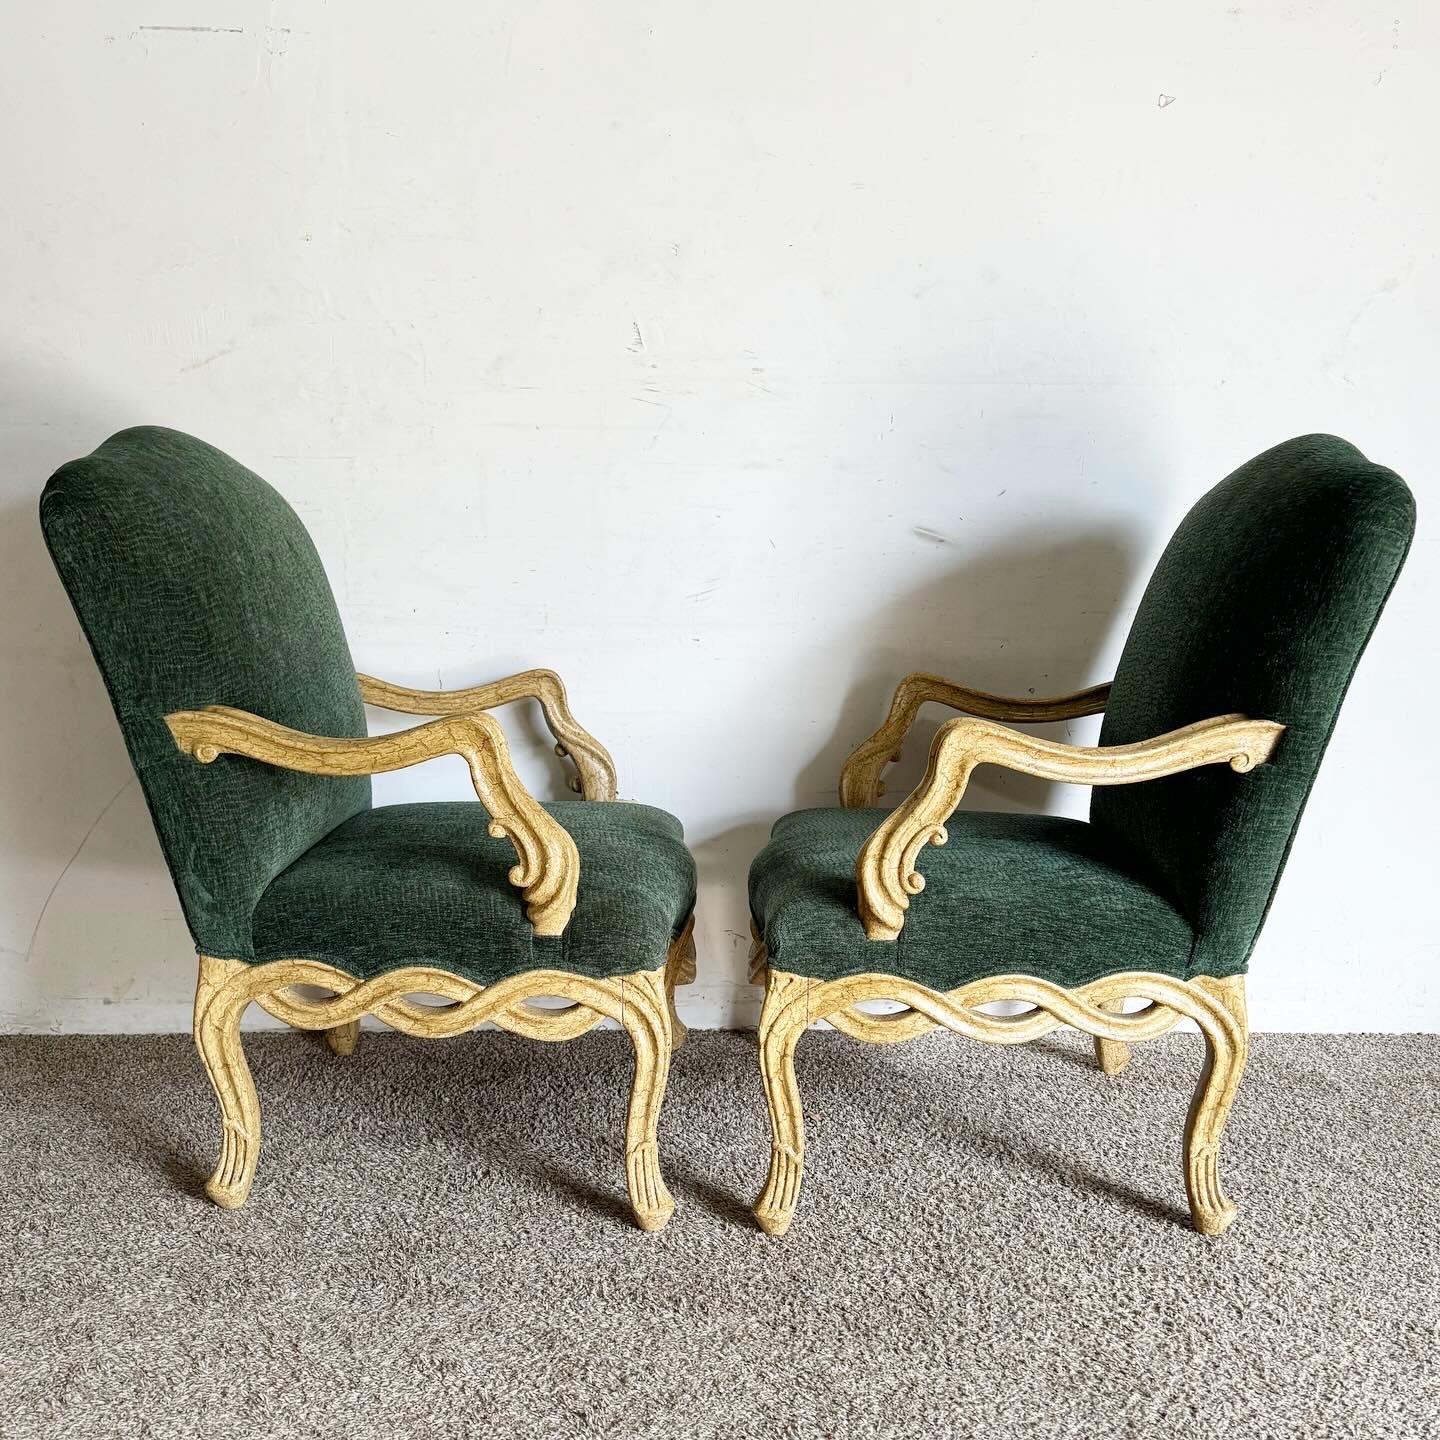 French Provincial Style Green Arm Chairs With Twisting Wooden Frame - a Pair For Sale 2